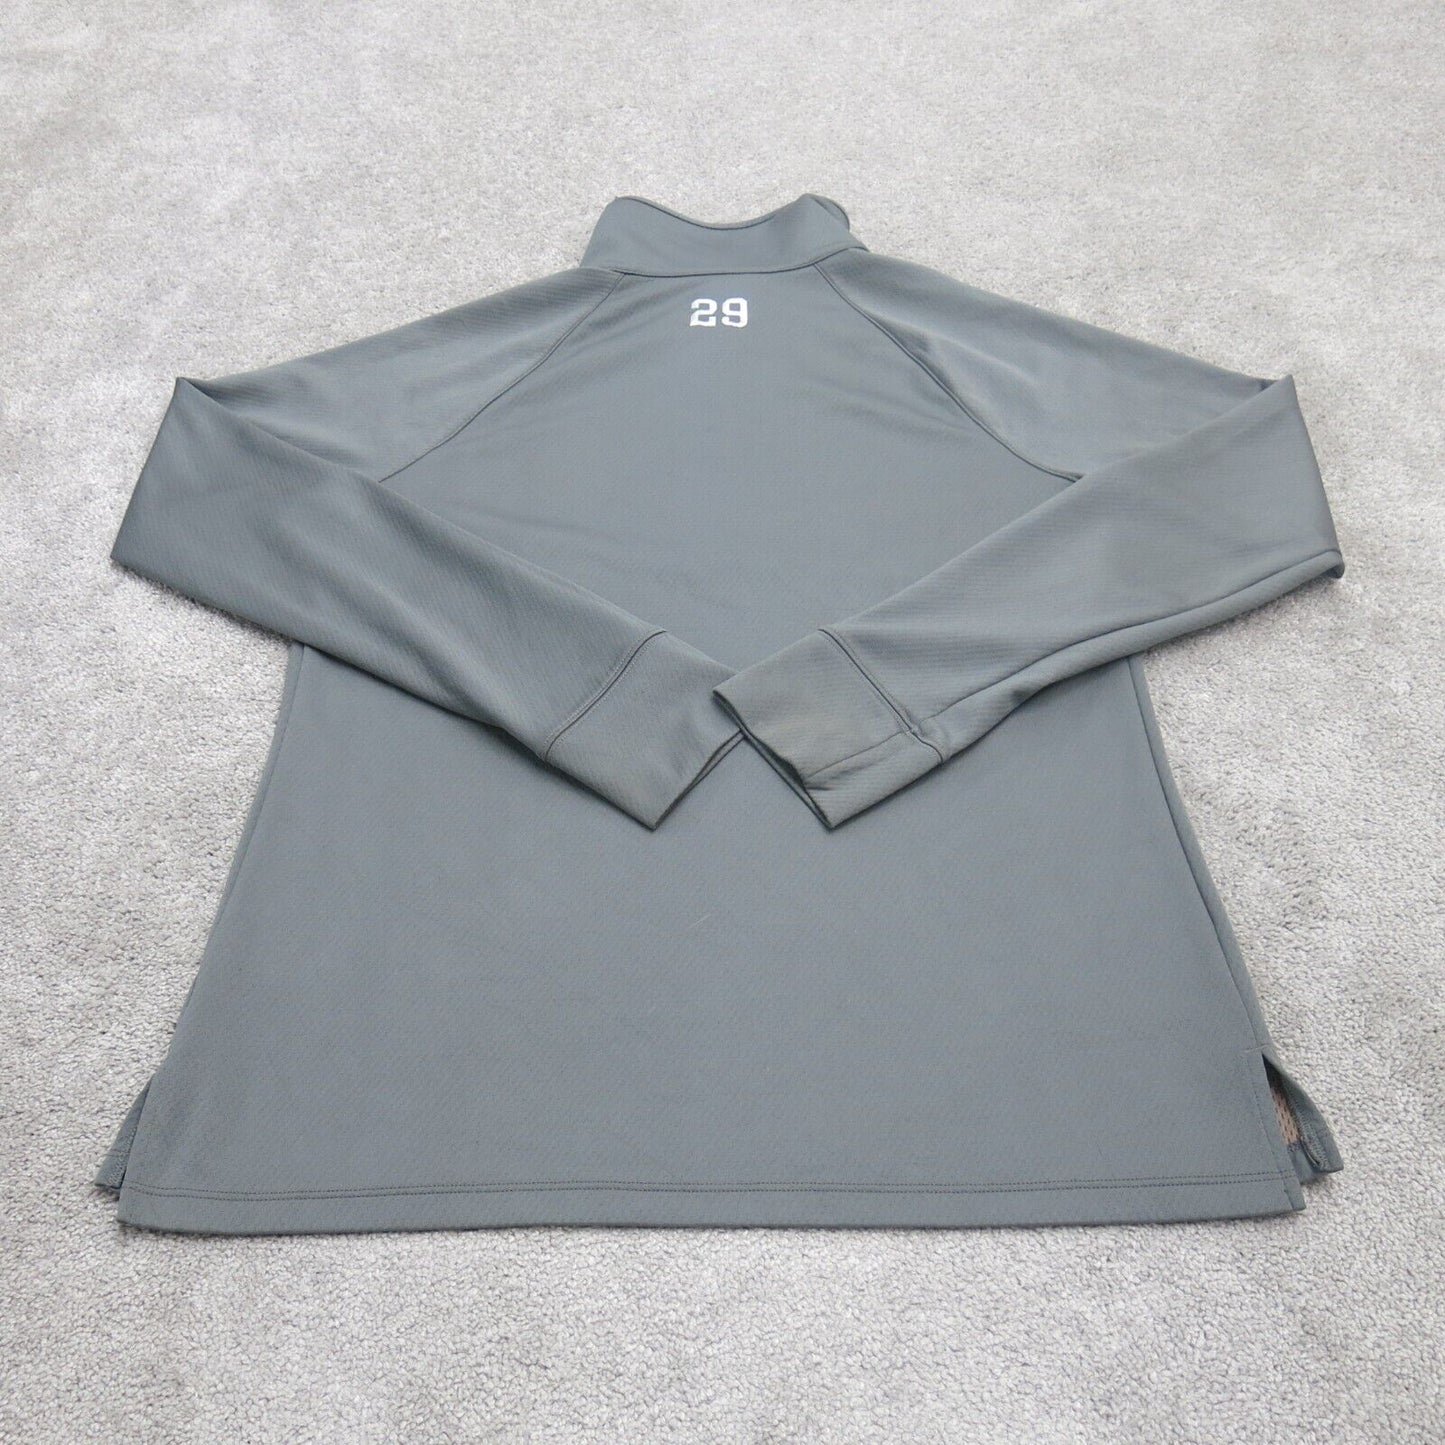 Under Armour Womens Activewear Top 1/2 Zip Long Sleeves Mock Neck Gray Size L